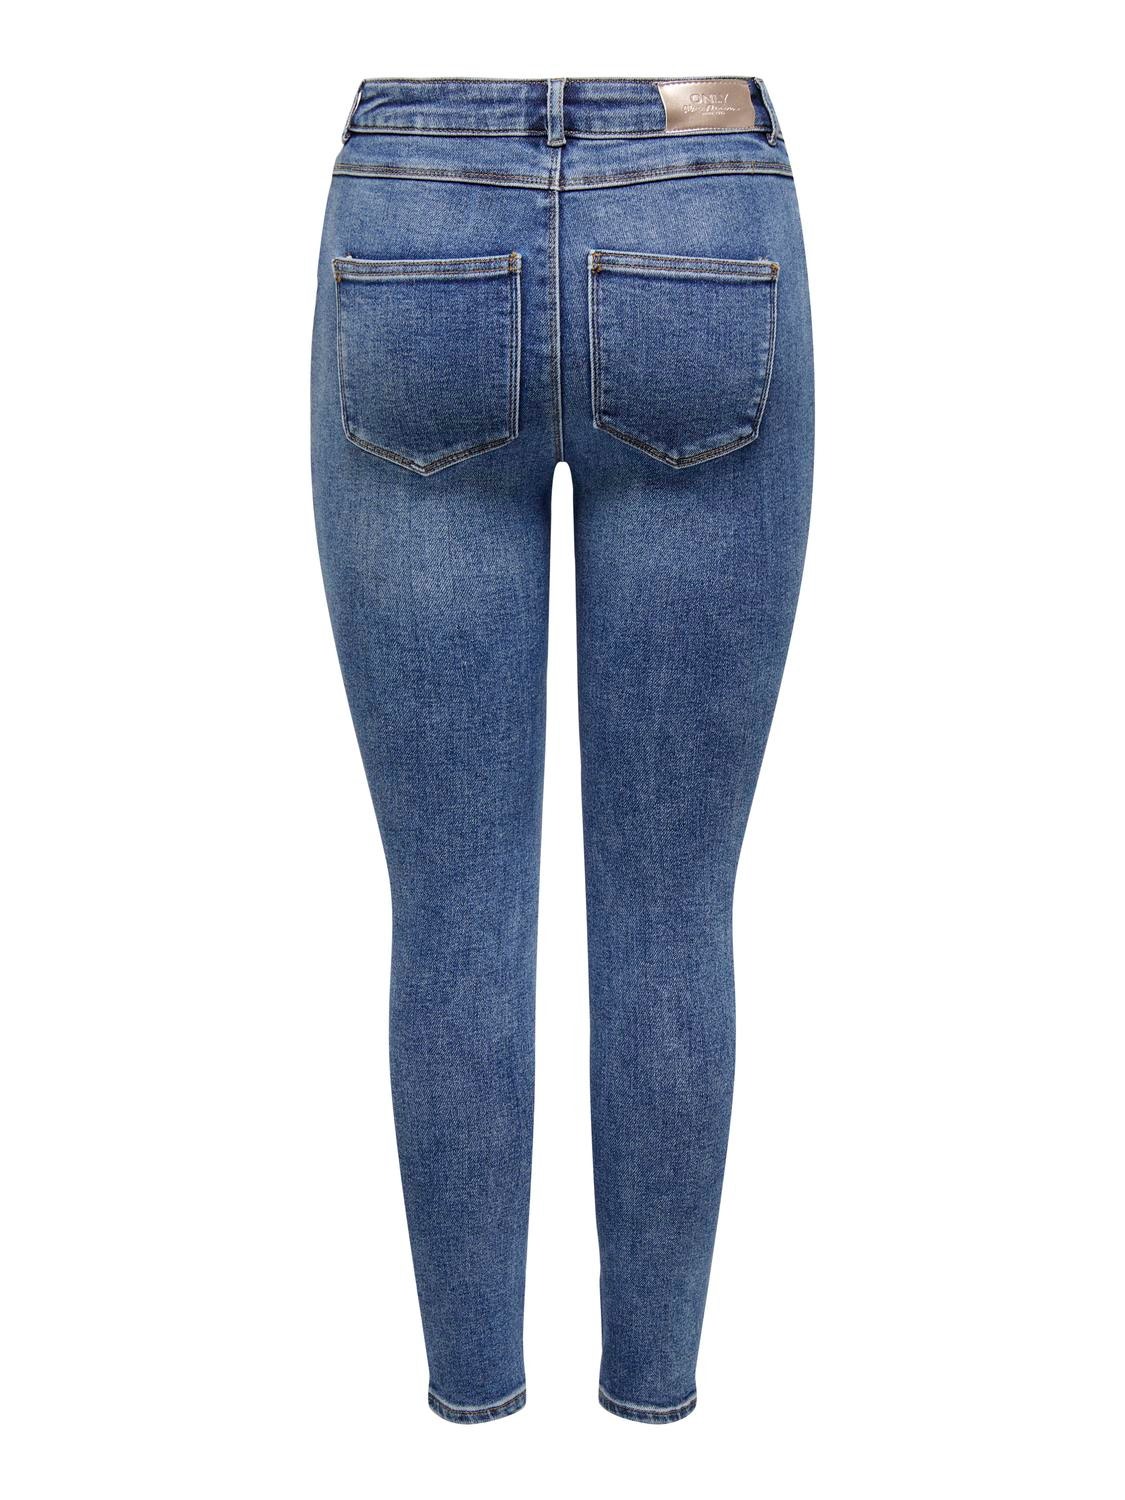 ONLY Skinny Fit Hohe Taille Jeans -Medium Blue Denim - 15181934